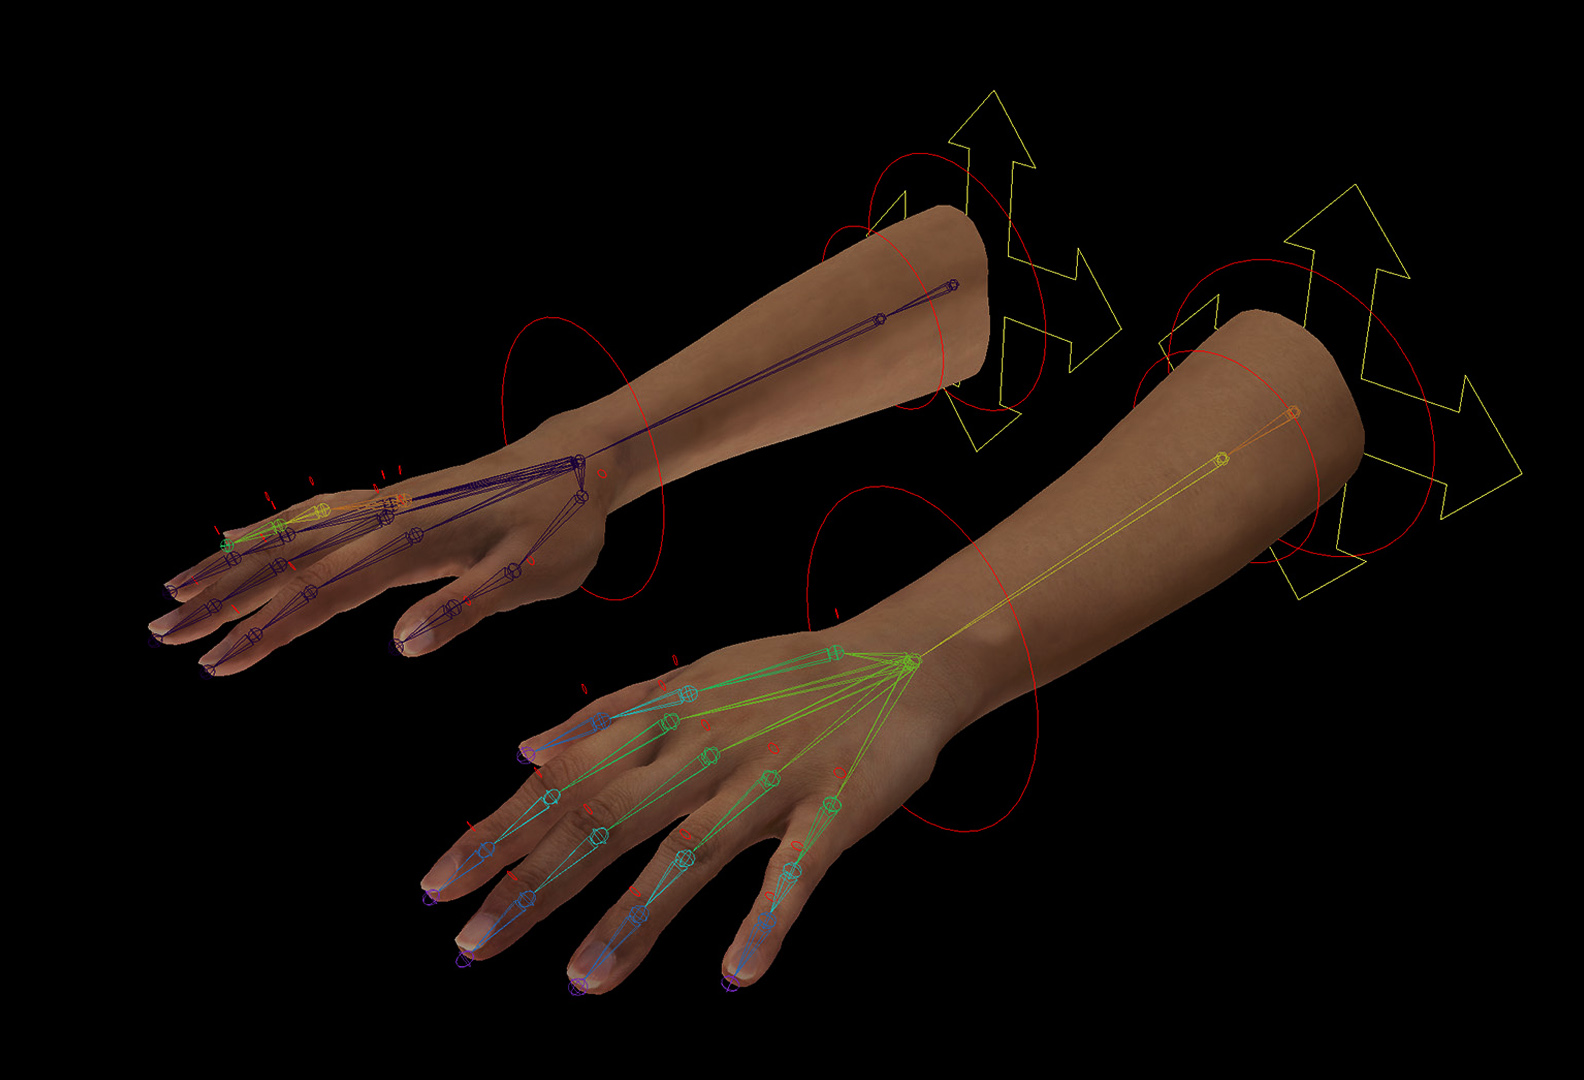 An image of two hands and forearms reaching forward in a black space. The hands are overlaid with technical schematics of the computer application that will control their movements in virtual space.